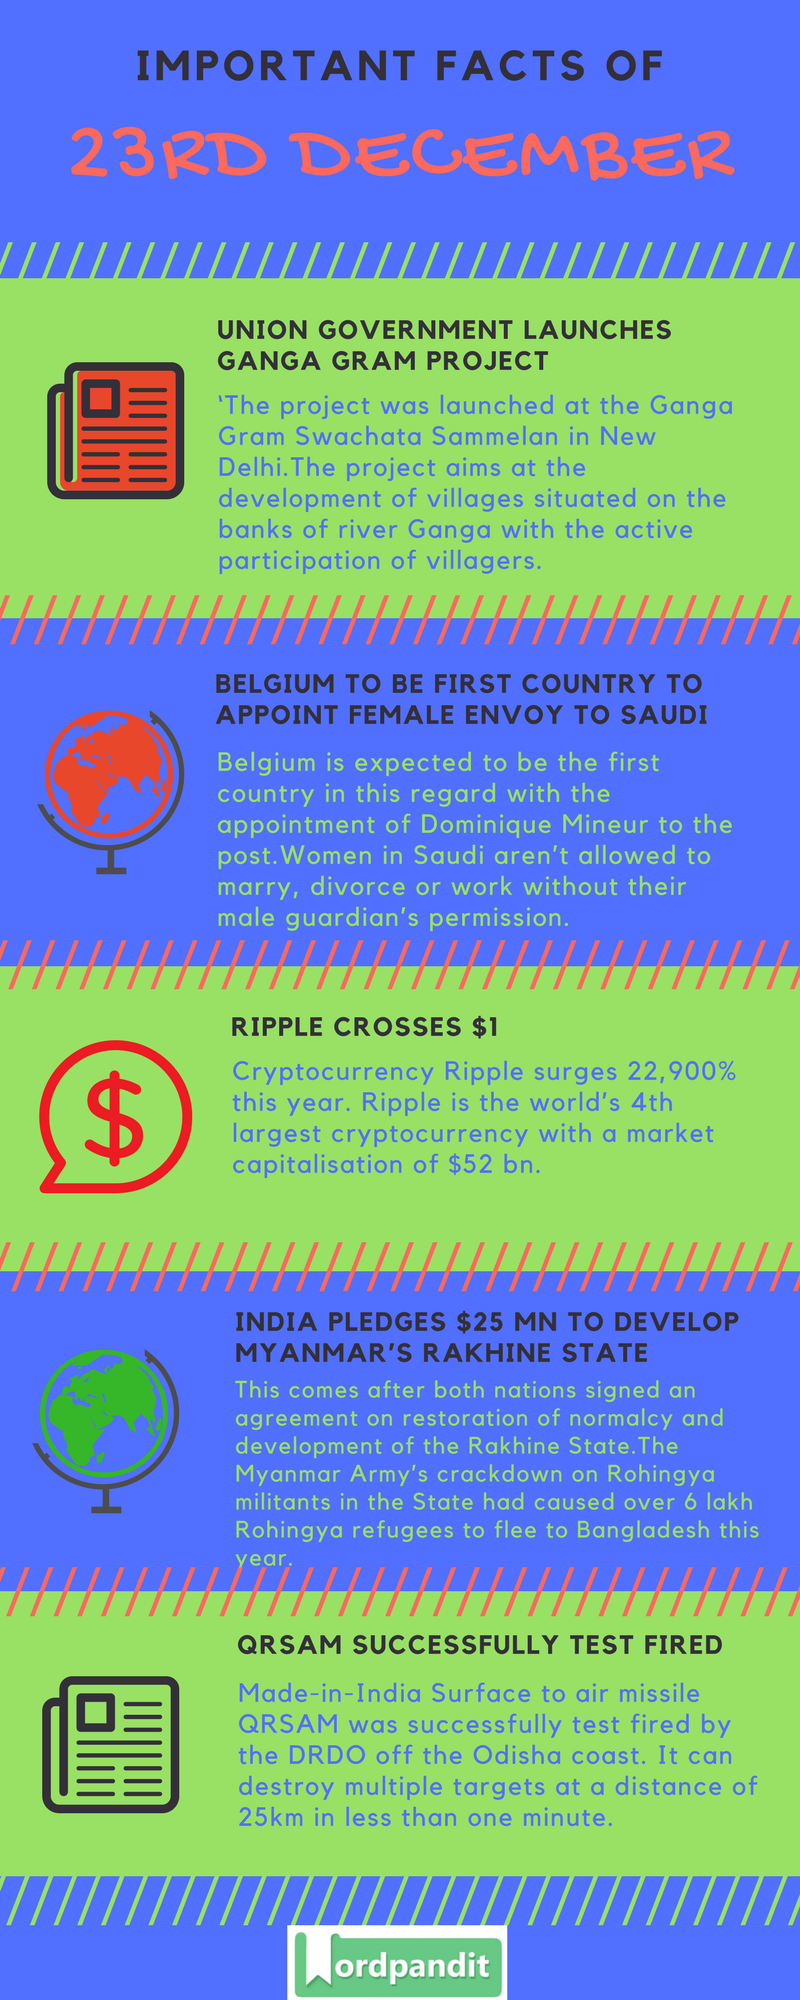 Daily-Current-Affairs-25-december-2017-Current-Affairs-Quiz-december-26-2017-Current-Affairs-Infographic